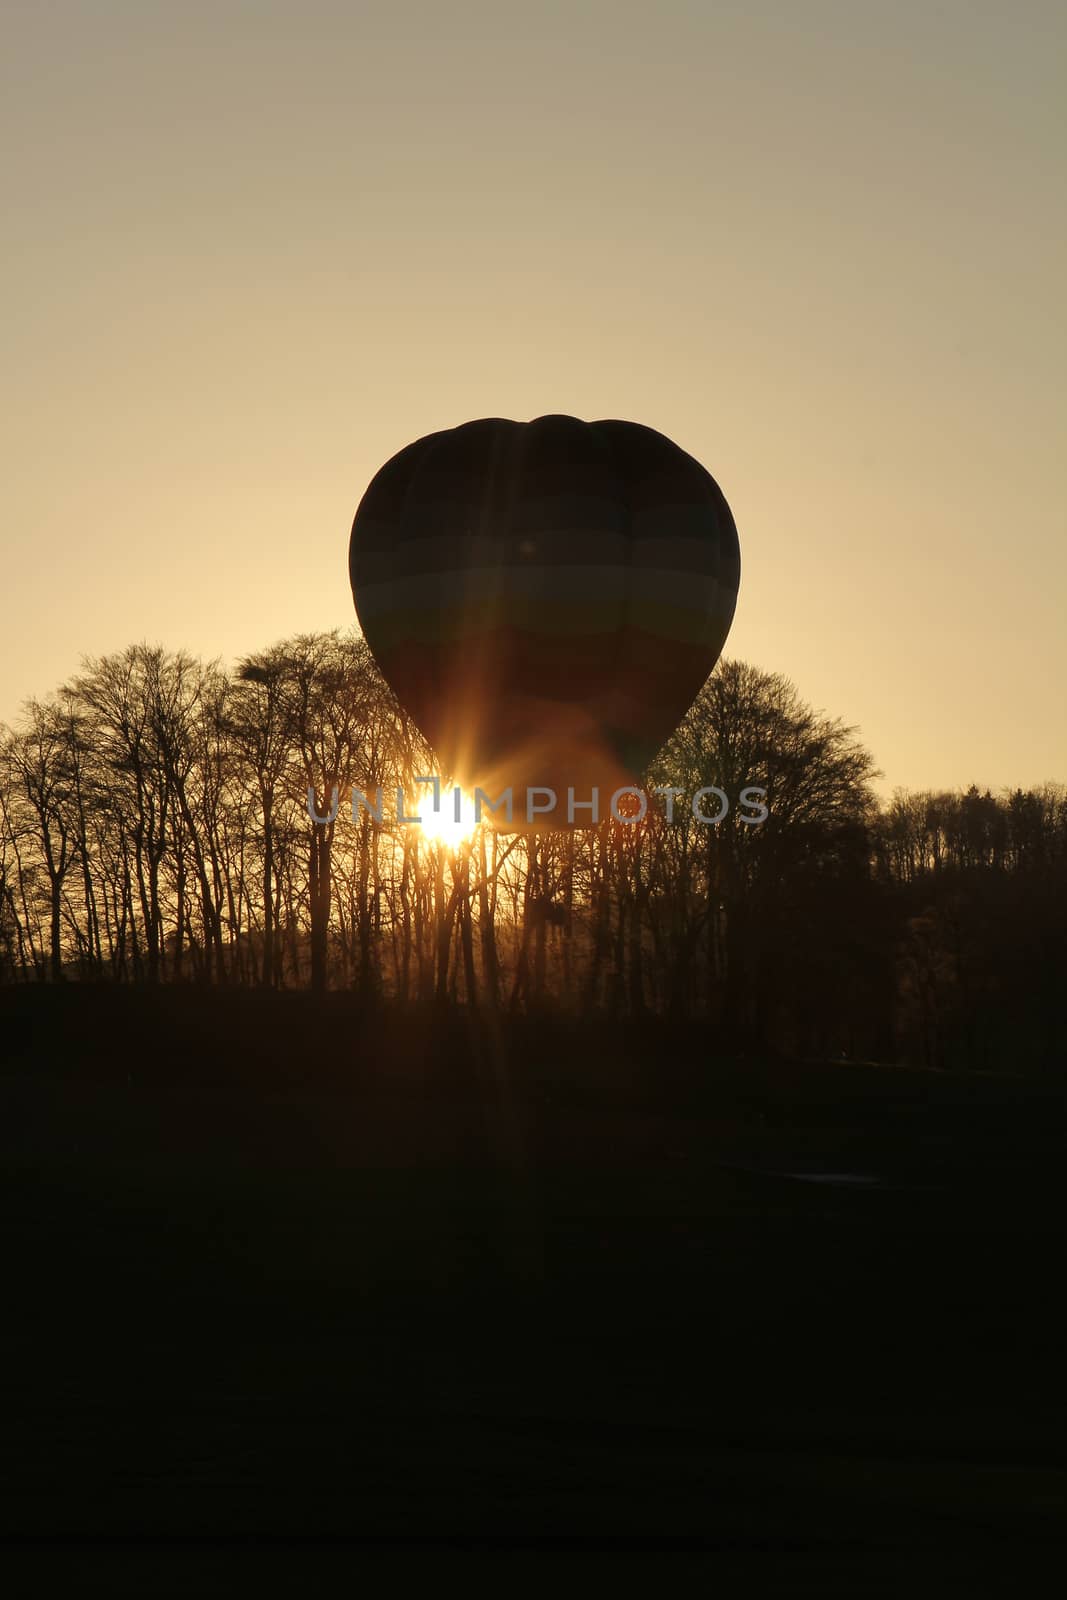 Hot air balloon landing during sunset with trees in background